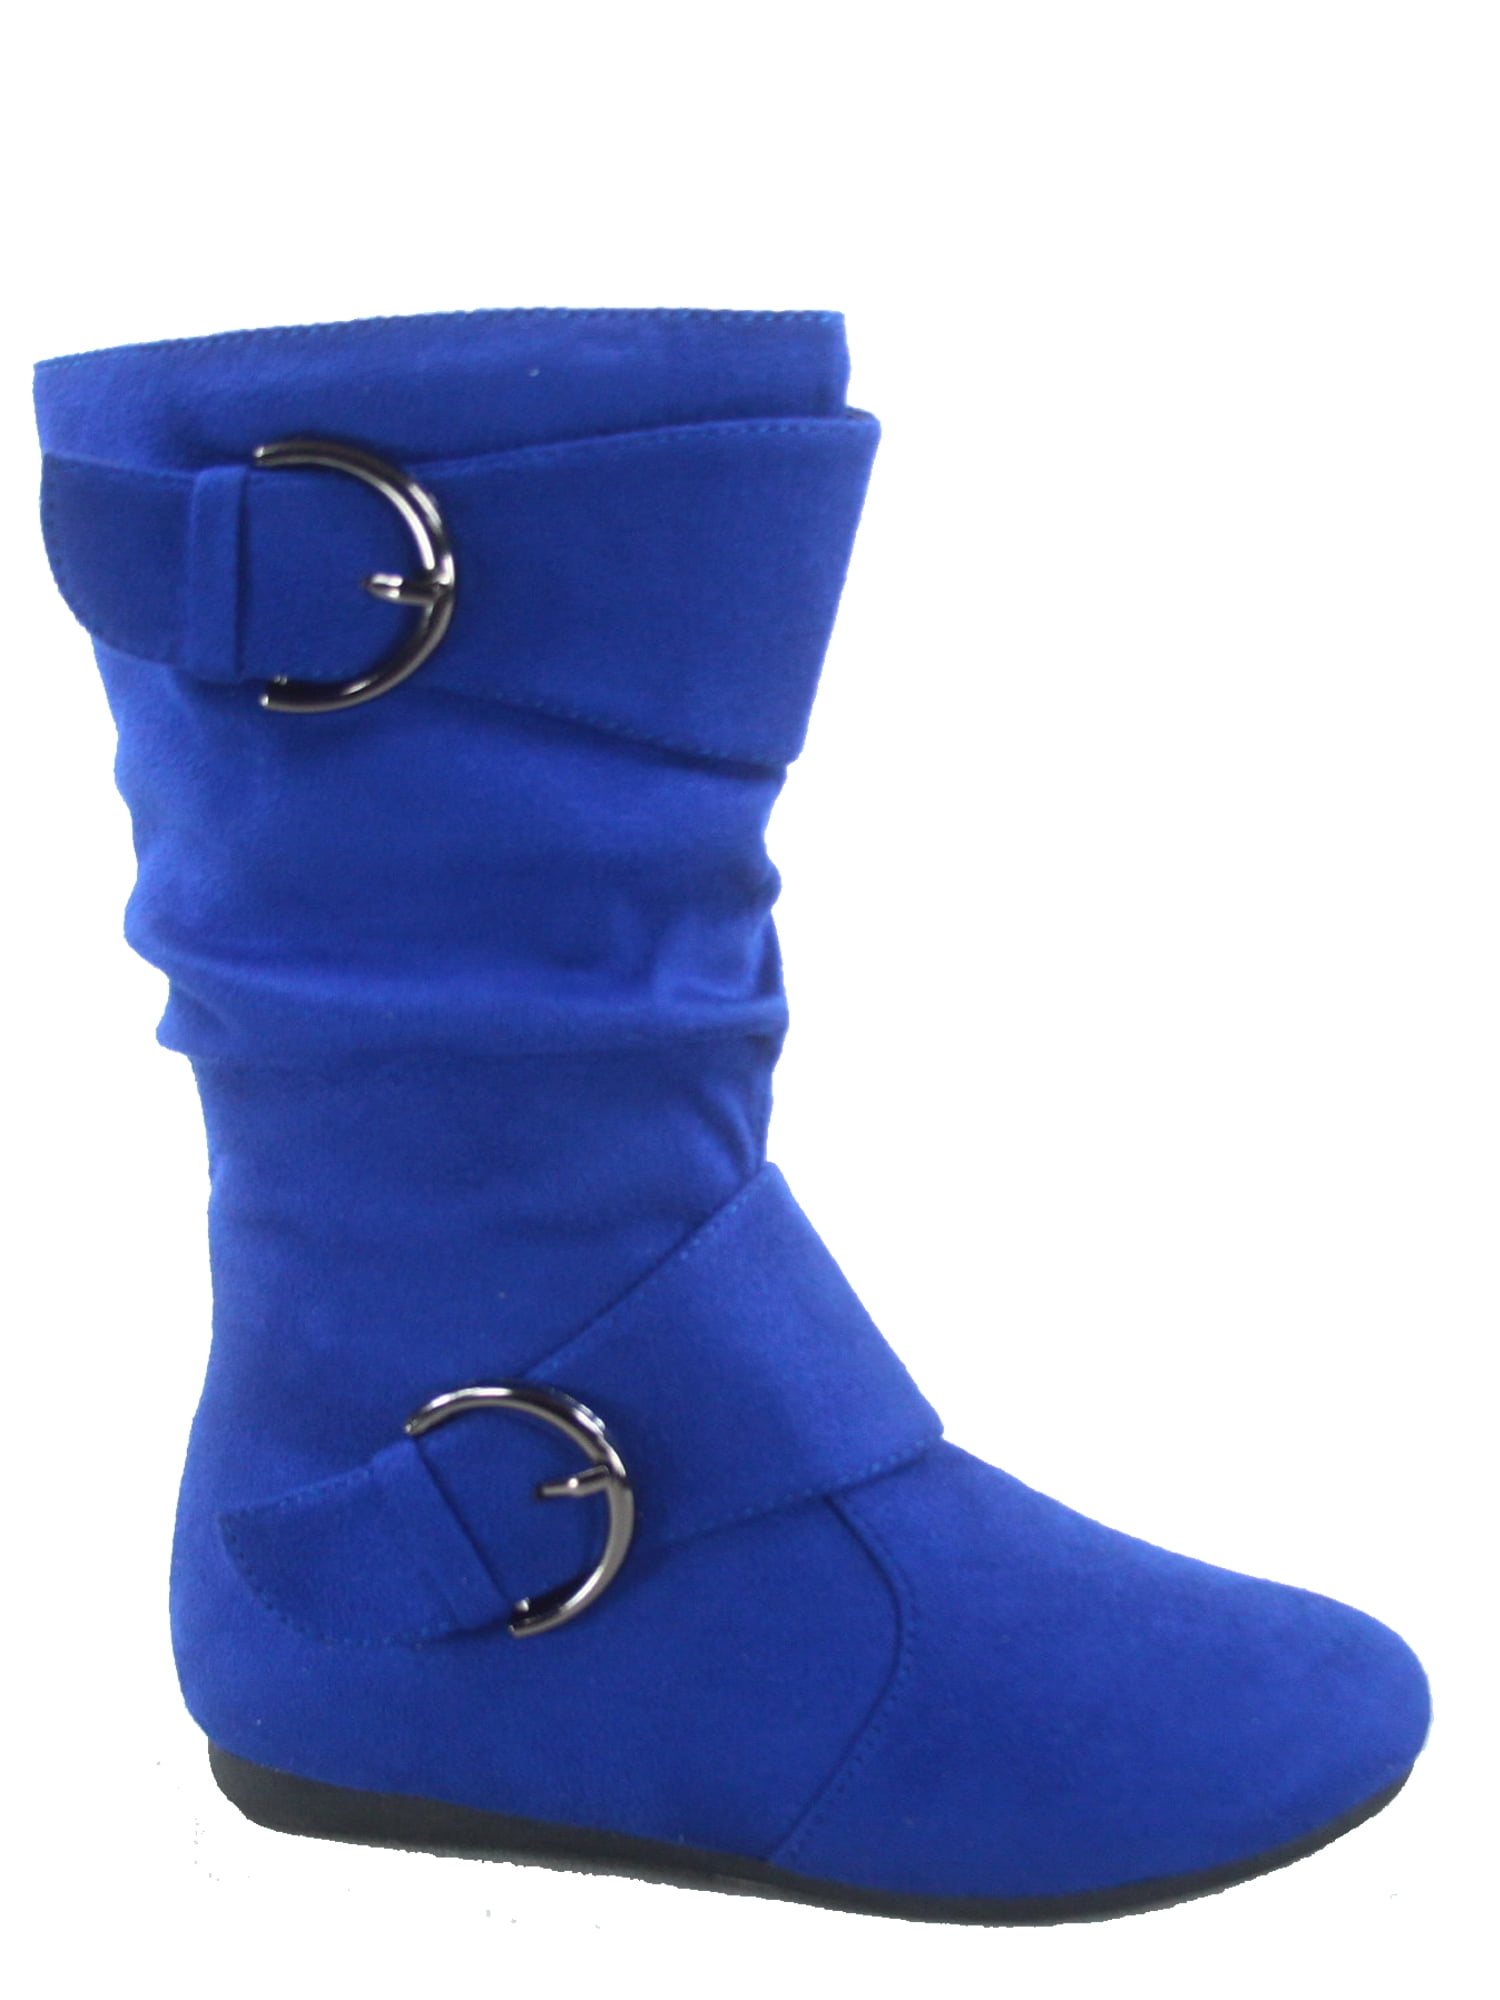 Details about   Women's Warm Faux Fur Lined Mid Calf Snow Boots Ladies Buckle Wedge Heel Shoes D 